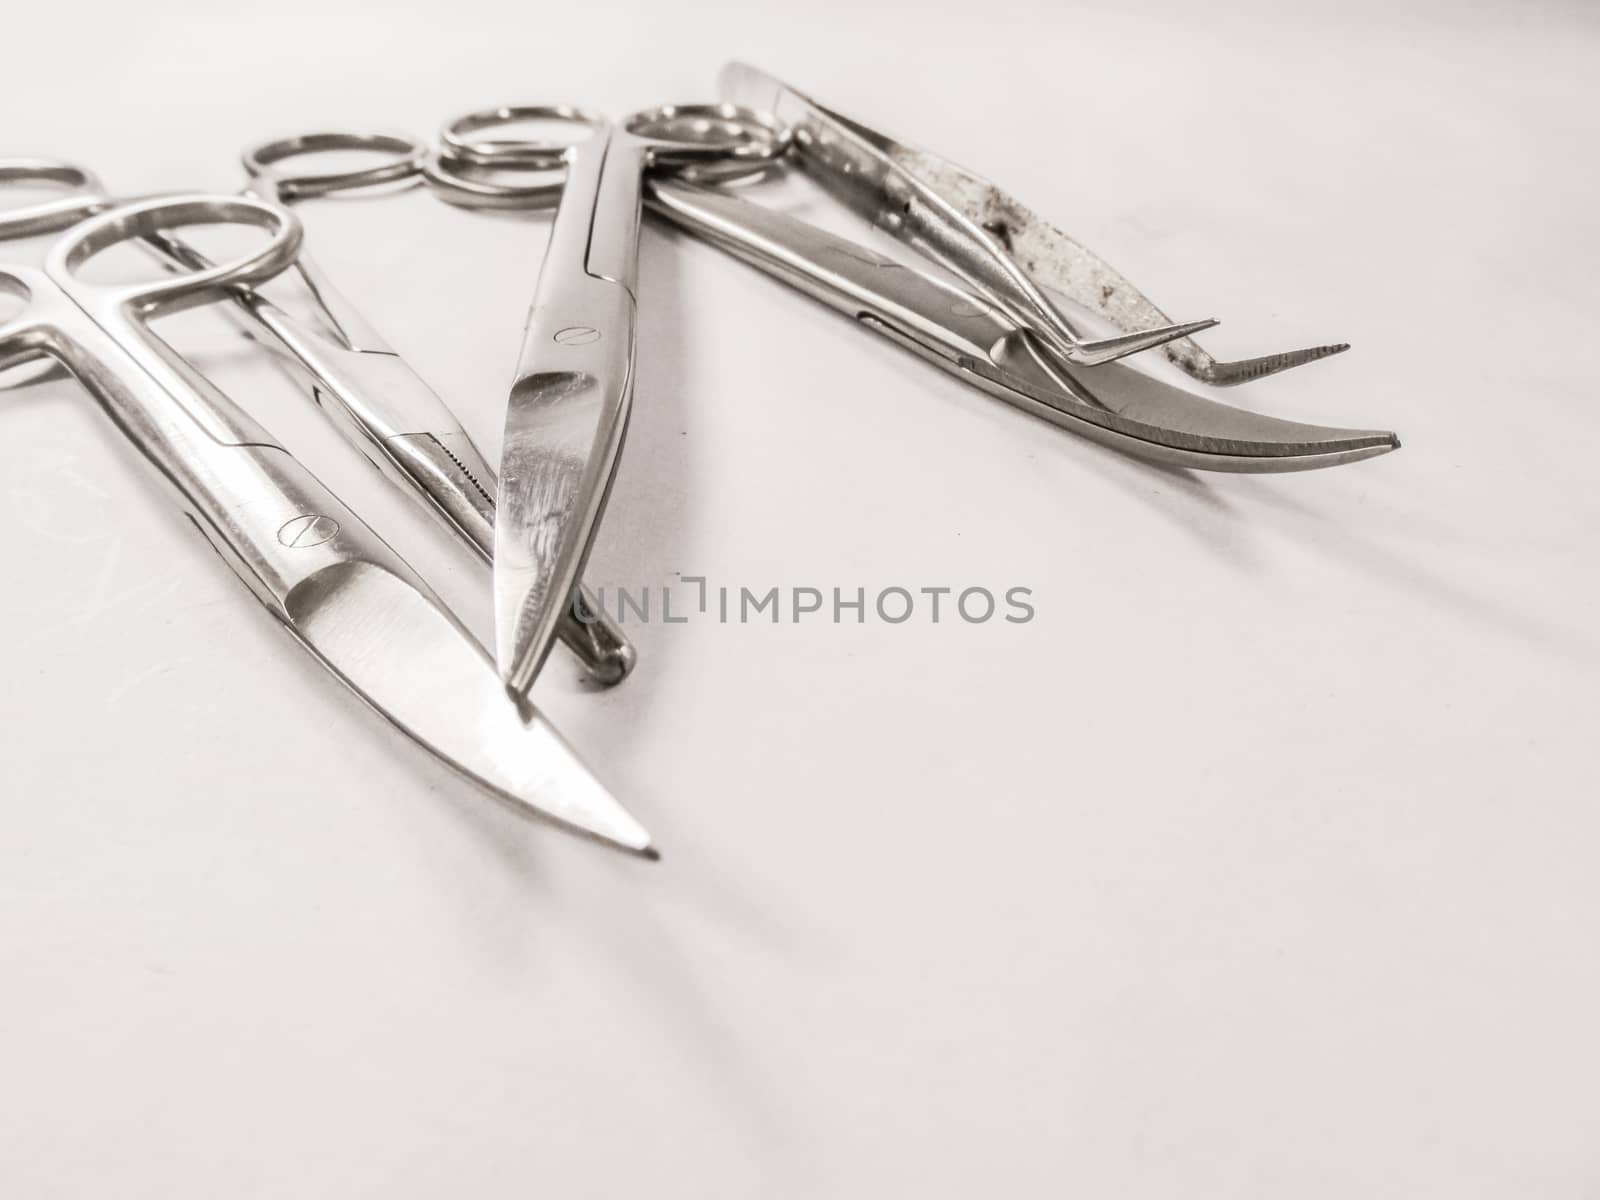 Surgical instruments in a setup for O.T.